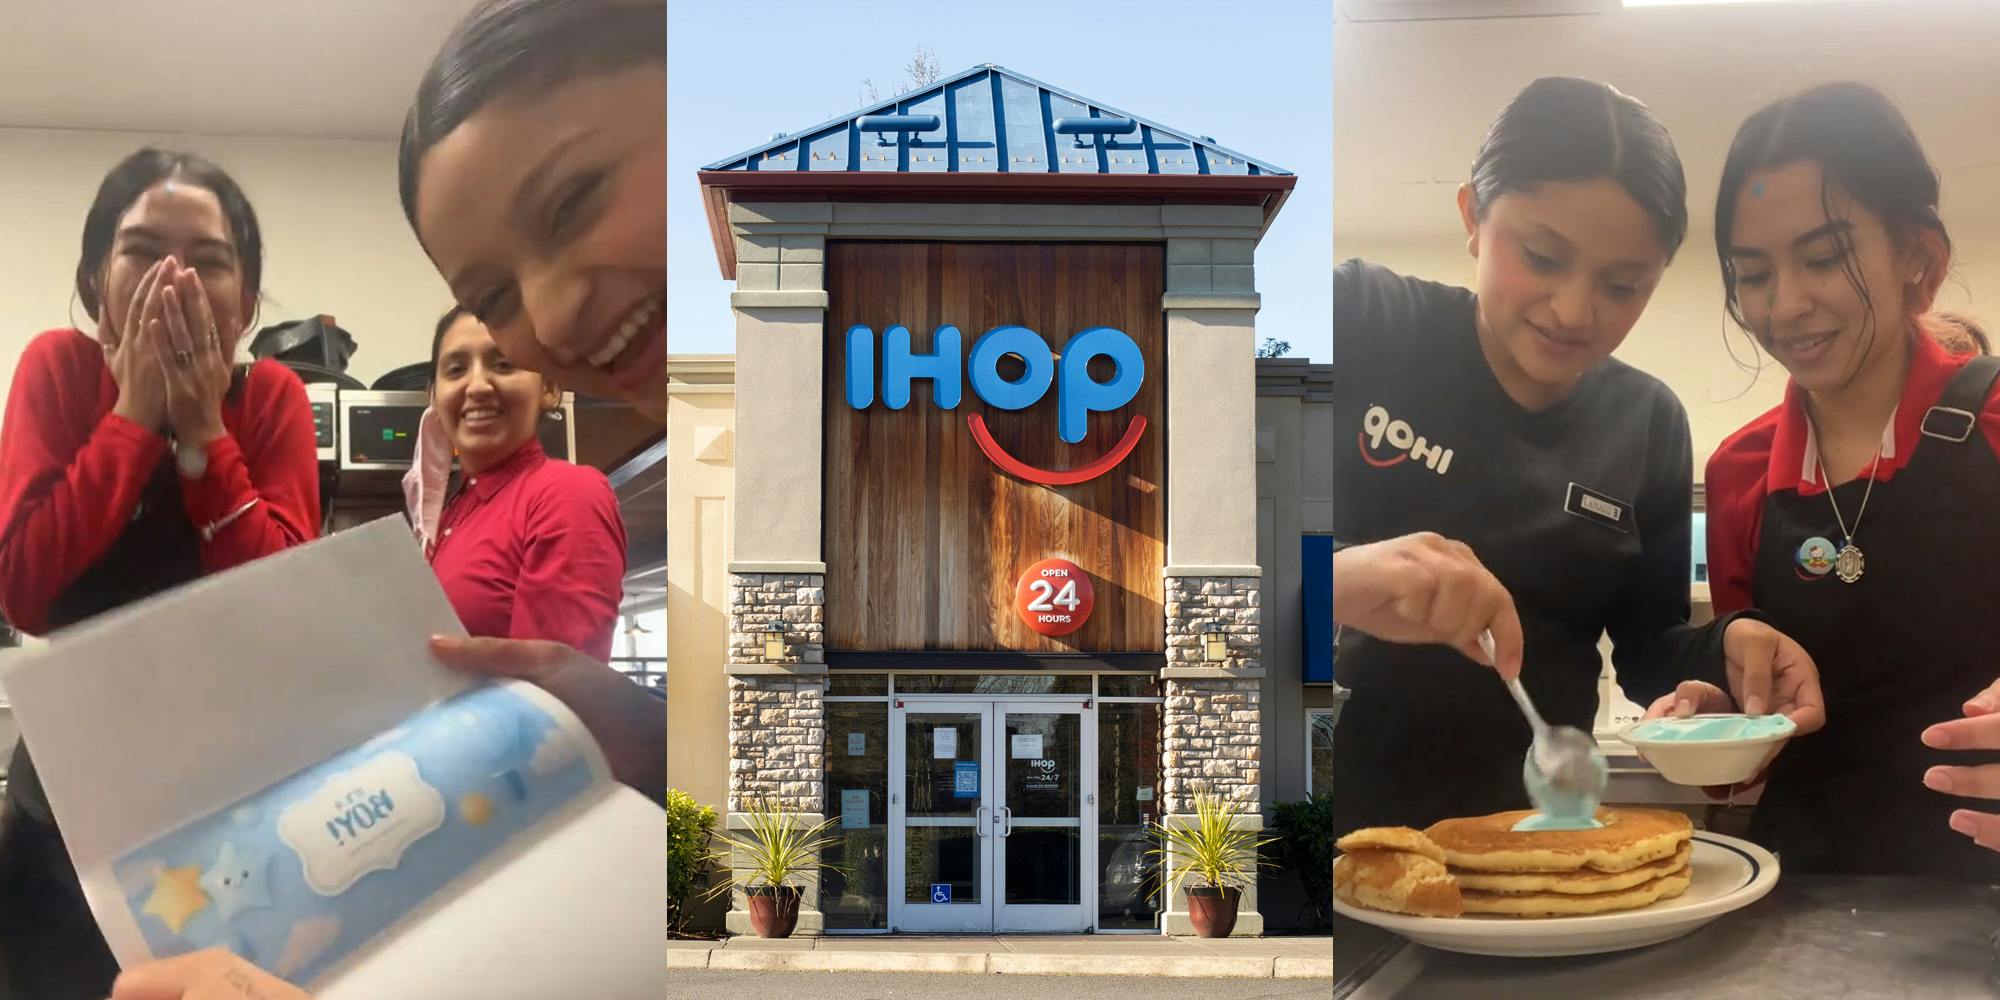 IHOP workers with "it's a BOY" paper in hand (l) IHOP building with sign (c) IHOP workers adding blue frosting inside pancake layers (r)